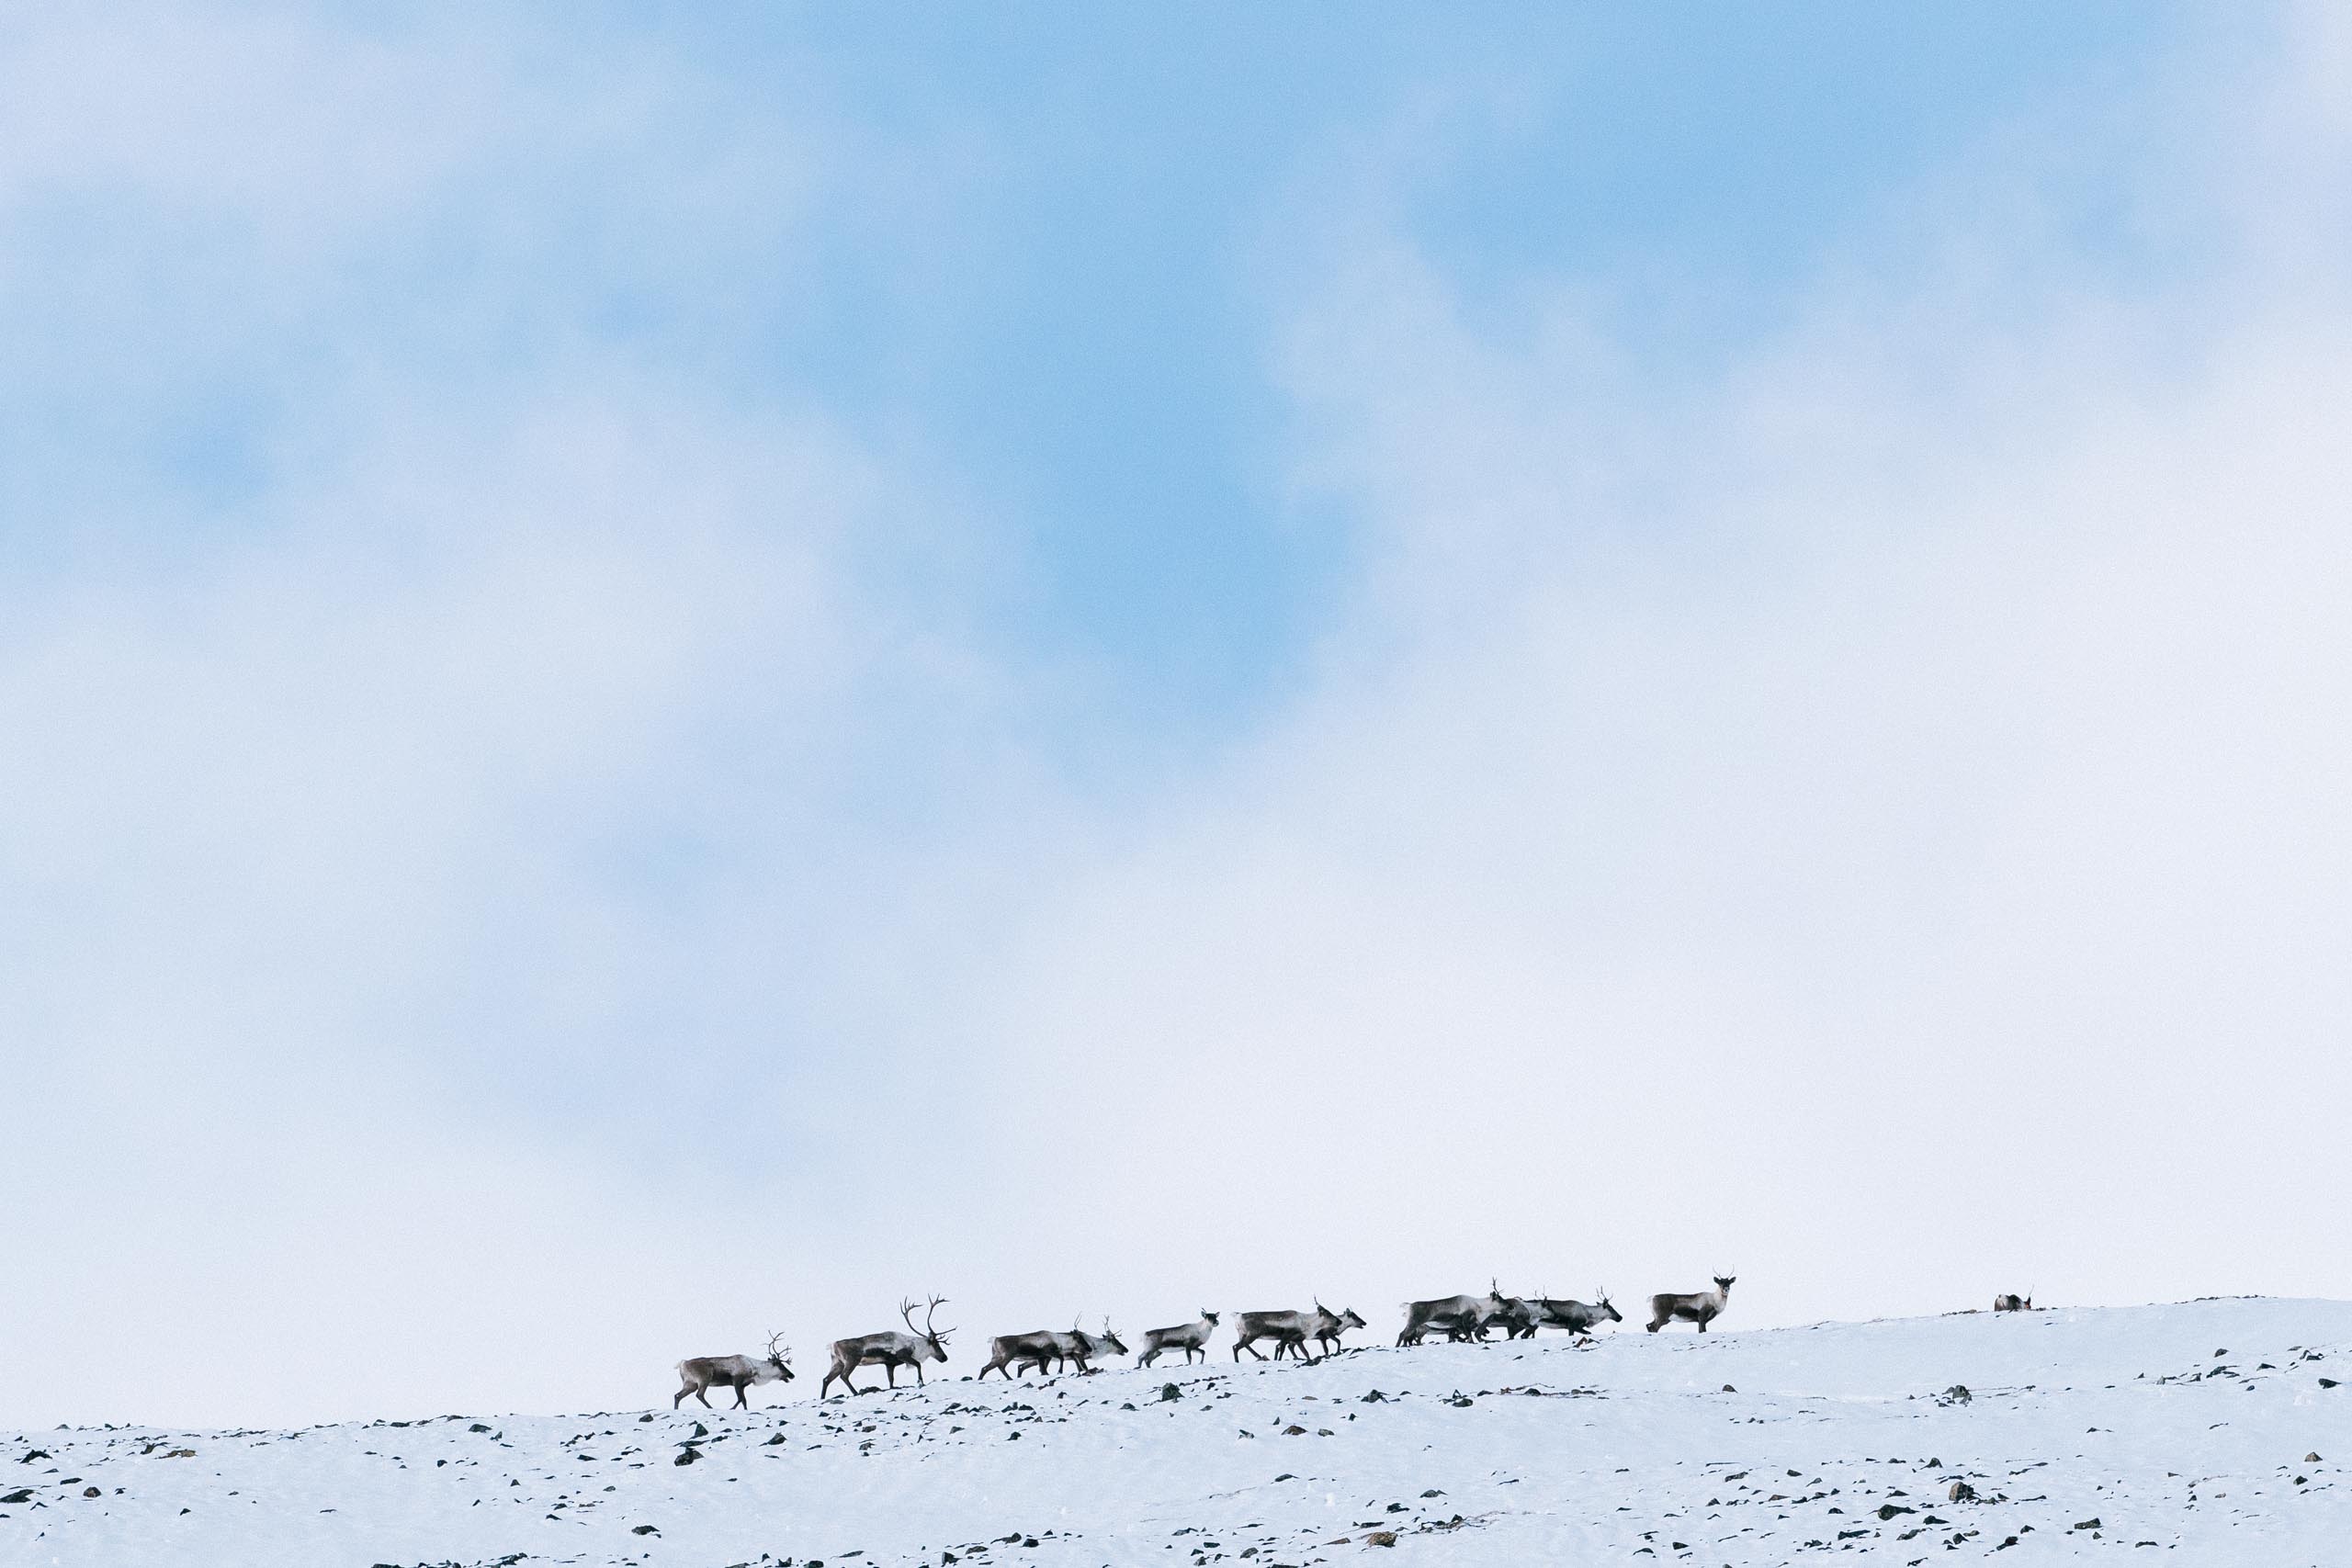 A group of northern mountain caribou are seen walking along a ridge line against a cloudy blue sky